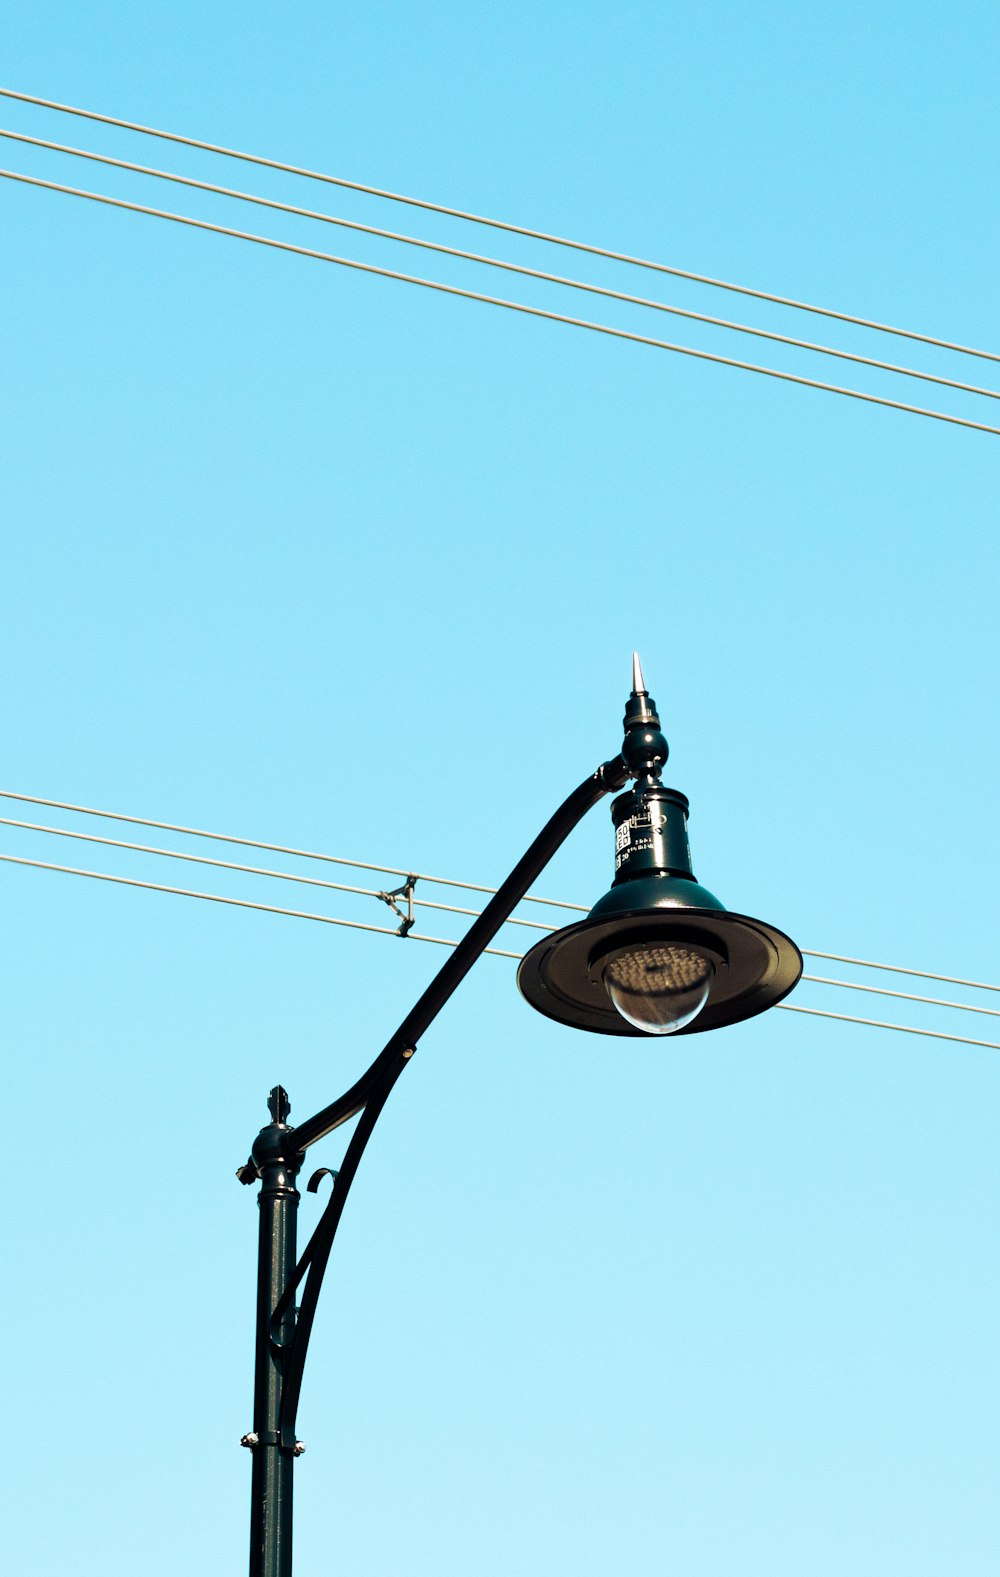 a street light on a pole with power lines in the background